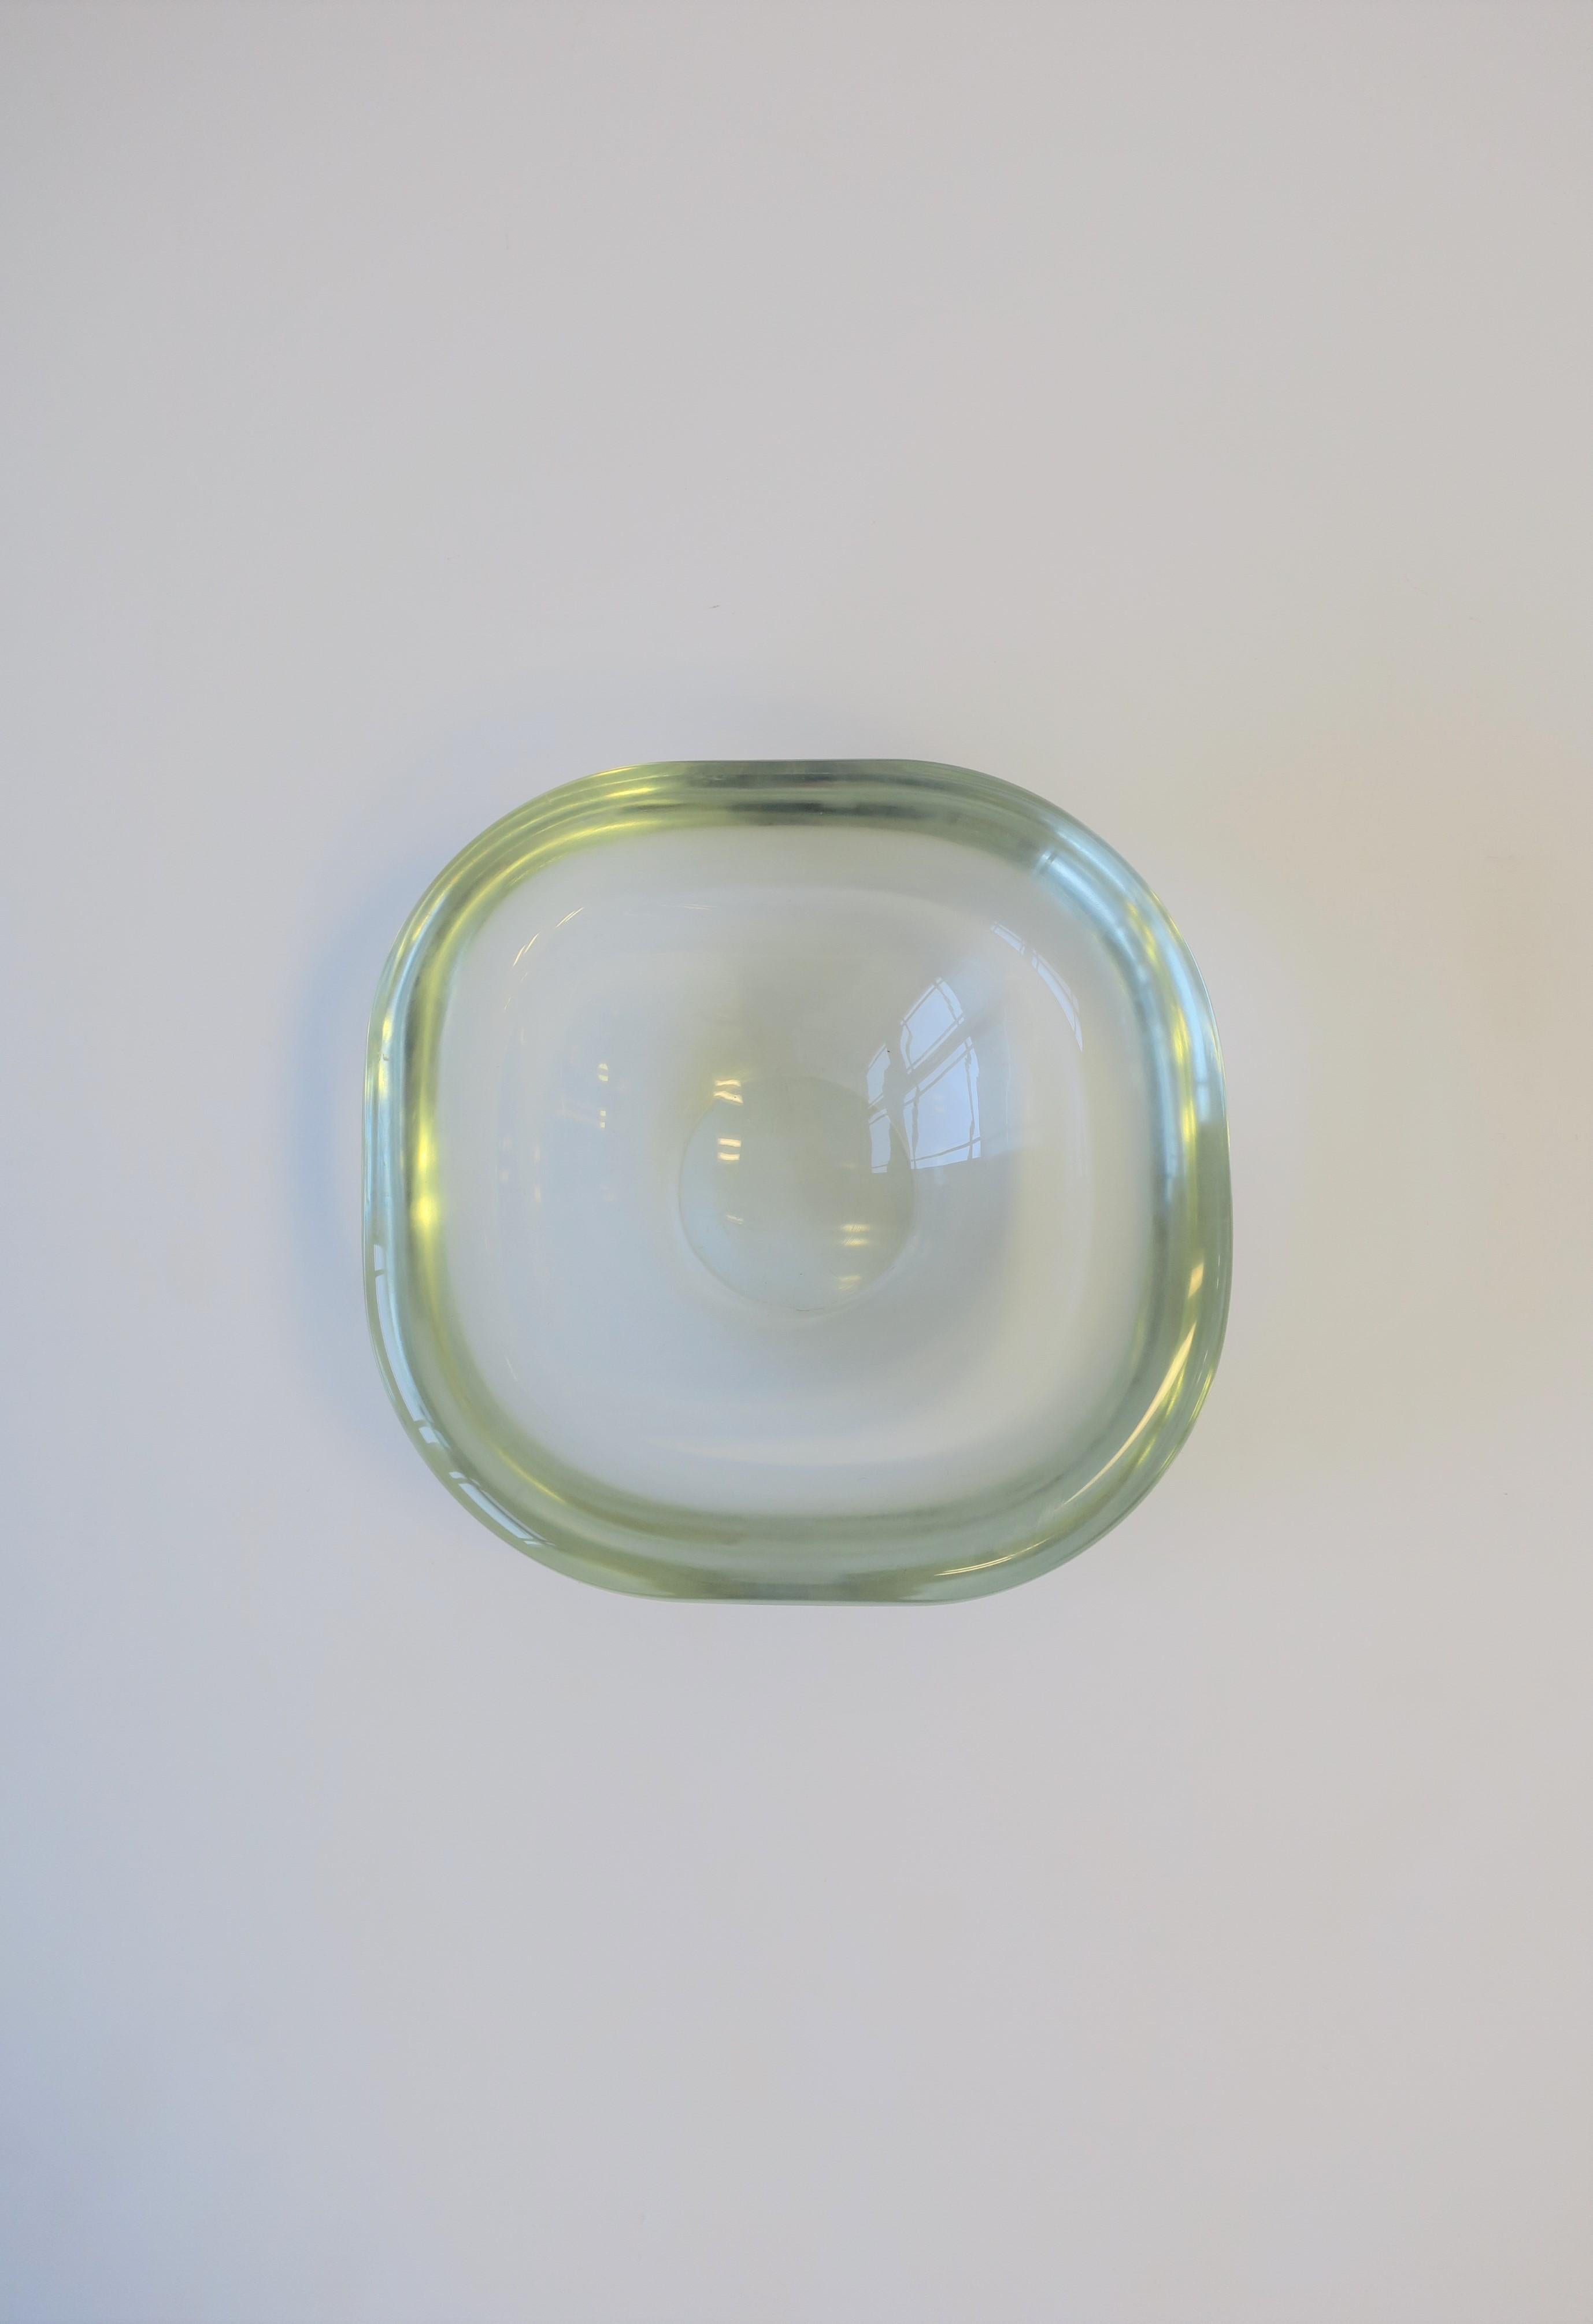 A very beautiful, substantial, signed Modern Italian Murano art glass bowl by designer Renato Anatra, circa mid-late 20th century, Italy. Bowl is clear/very light-green 'glass' hue with a smooth exterior and round edge. Measures 1.5